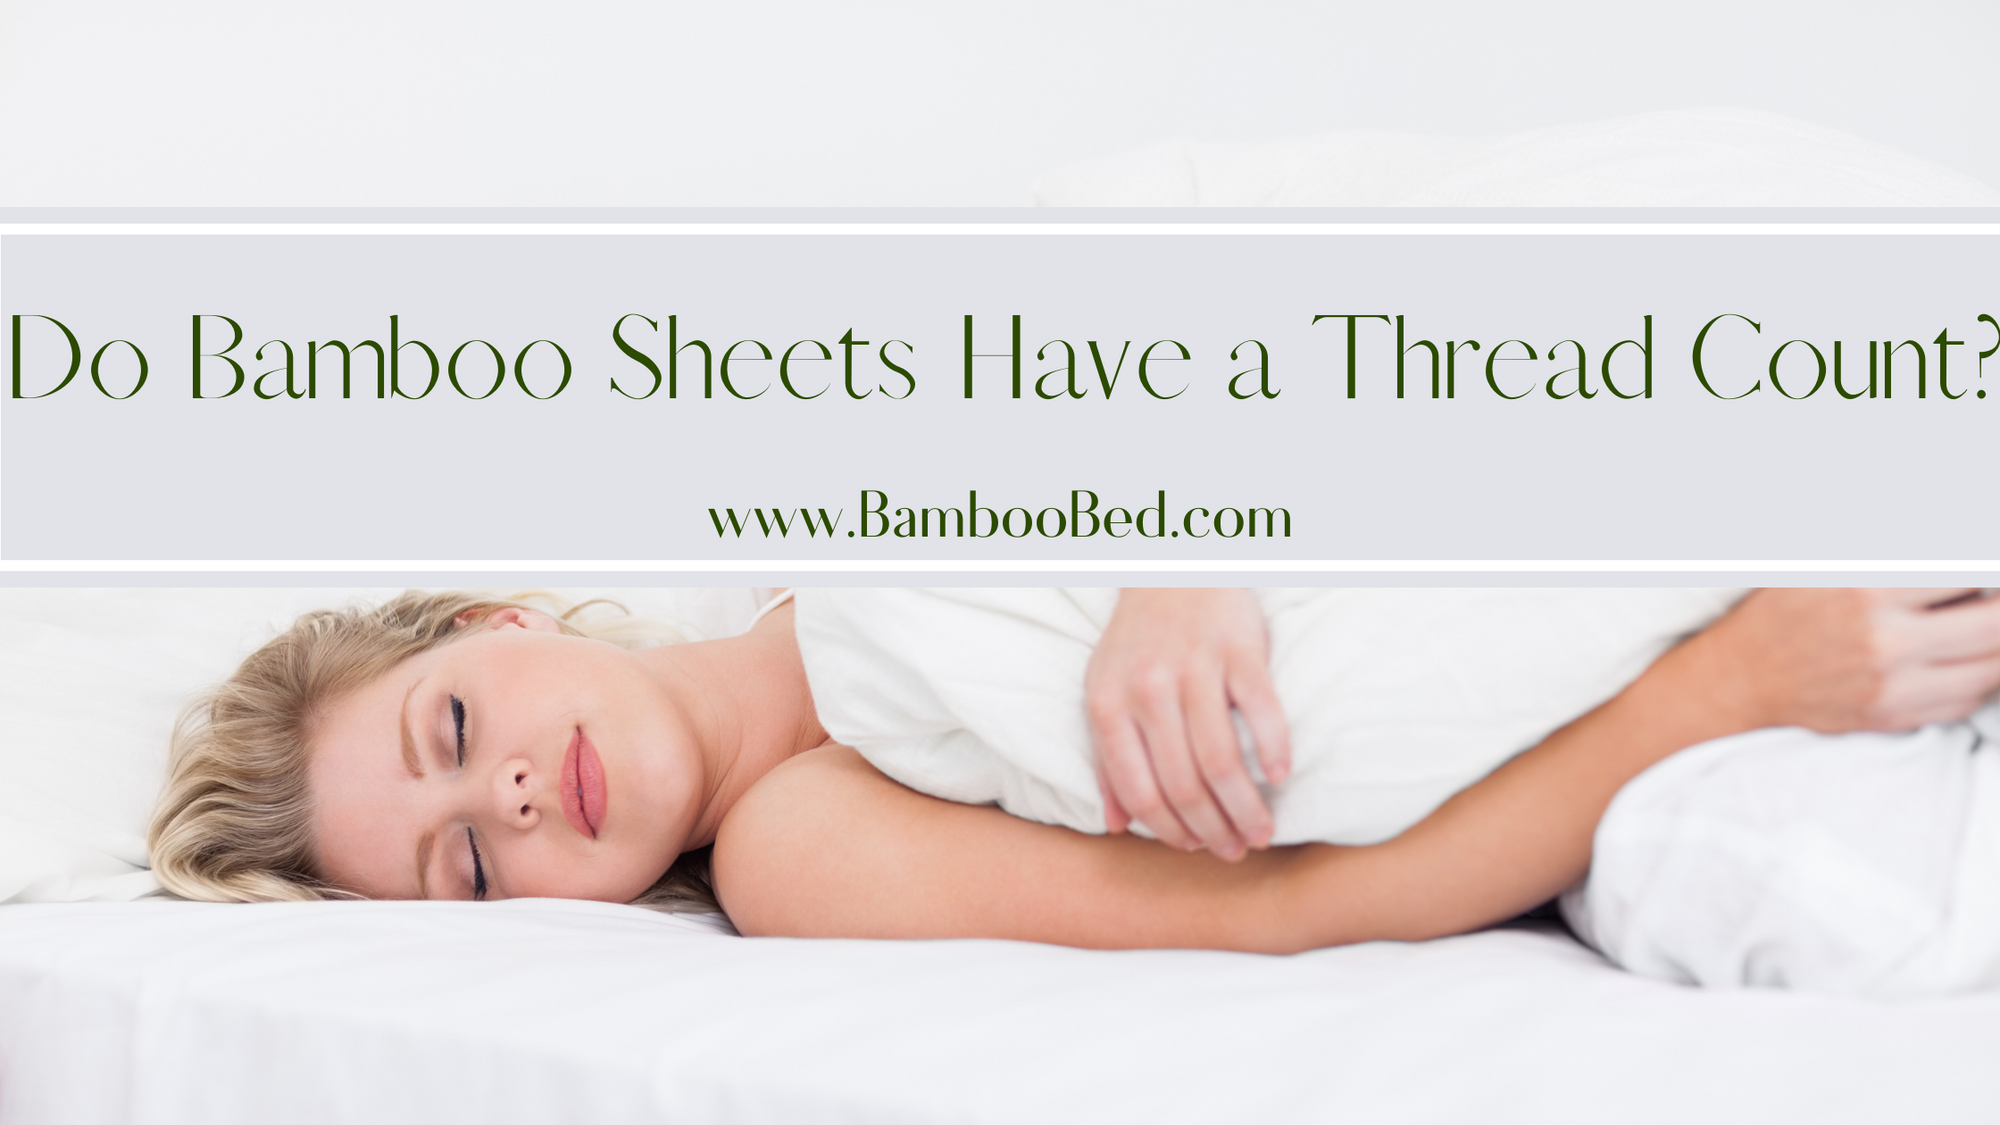 Bamboo sheets with perfect thread count over the bed in a luxurious room